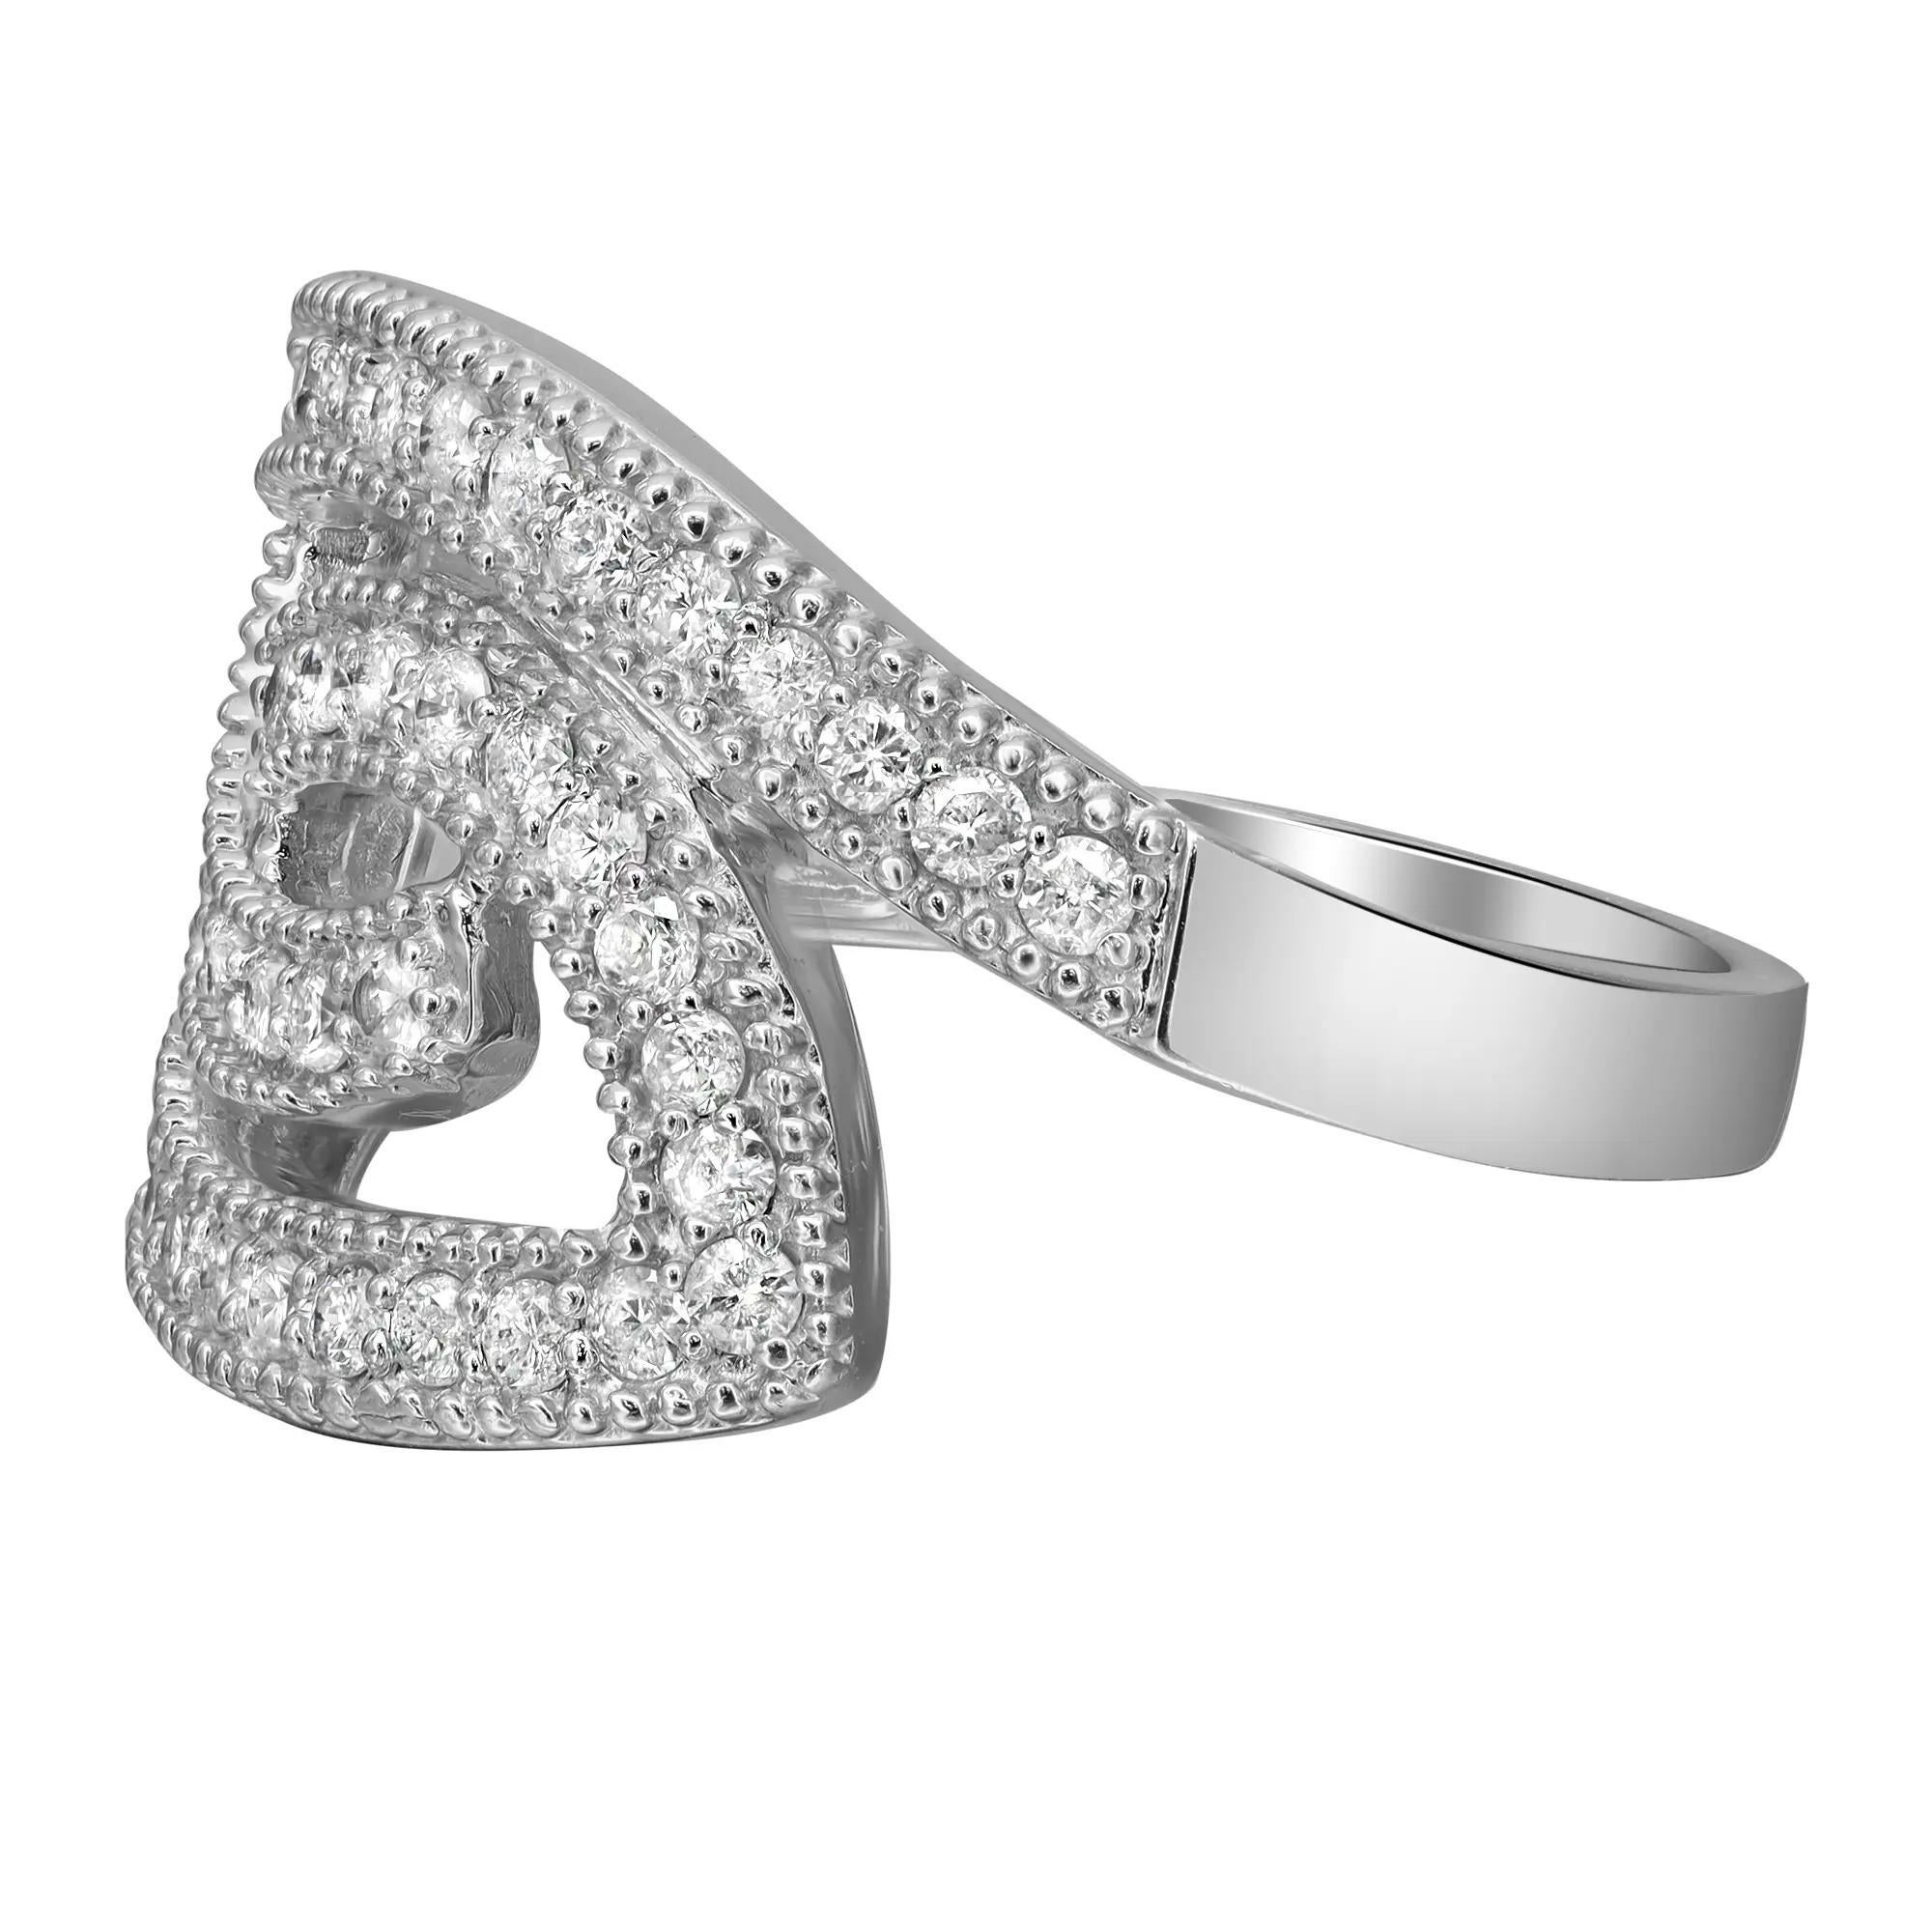 Dazzle away with this stunning ladies cocktail ring. Crafted in 14k white gold. Showcasing pave set round brilliant cut diamonds weighing 0.74 carat. Diamond quality: I color and SI2 clarity. Ring size: 7.5. Total weight: 6.12 grams. This ring is an